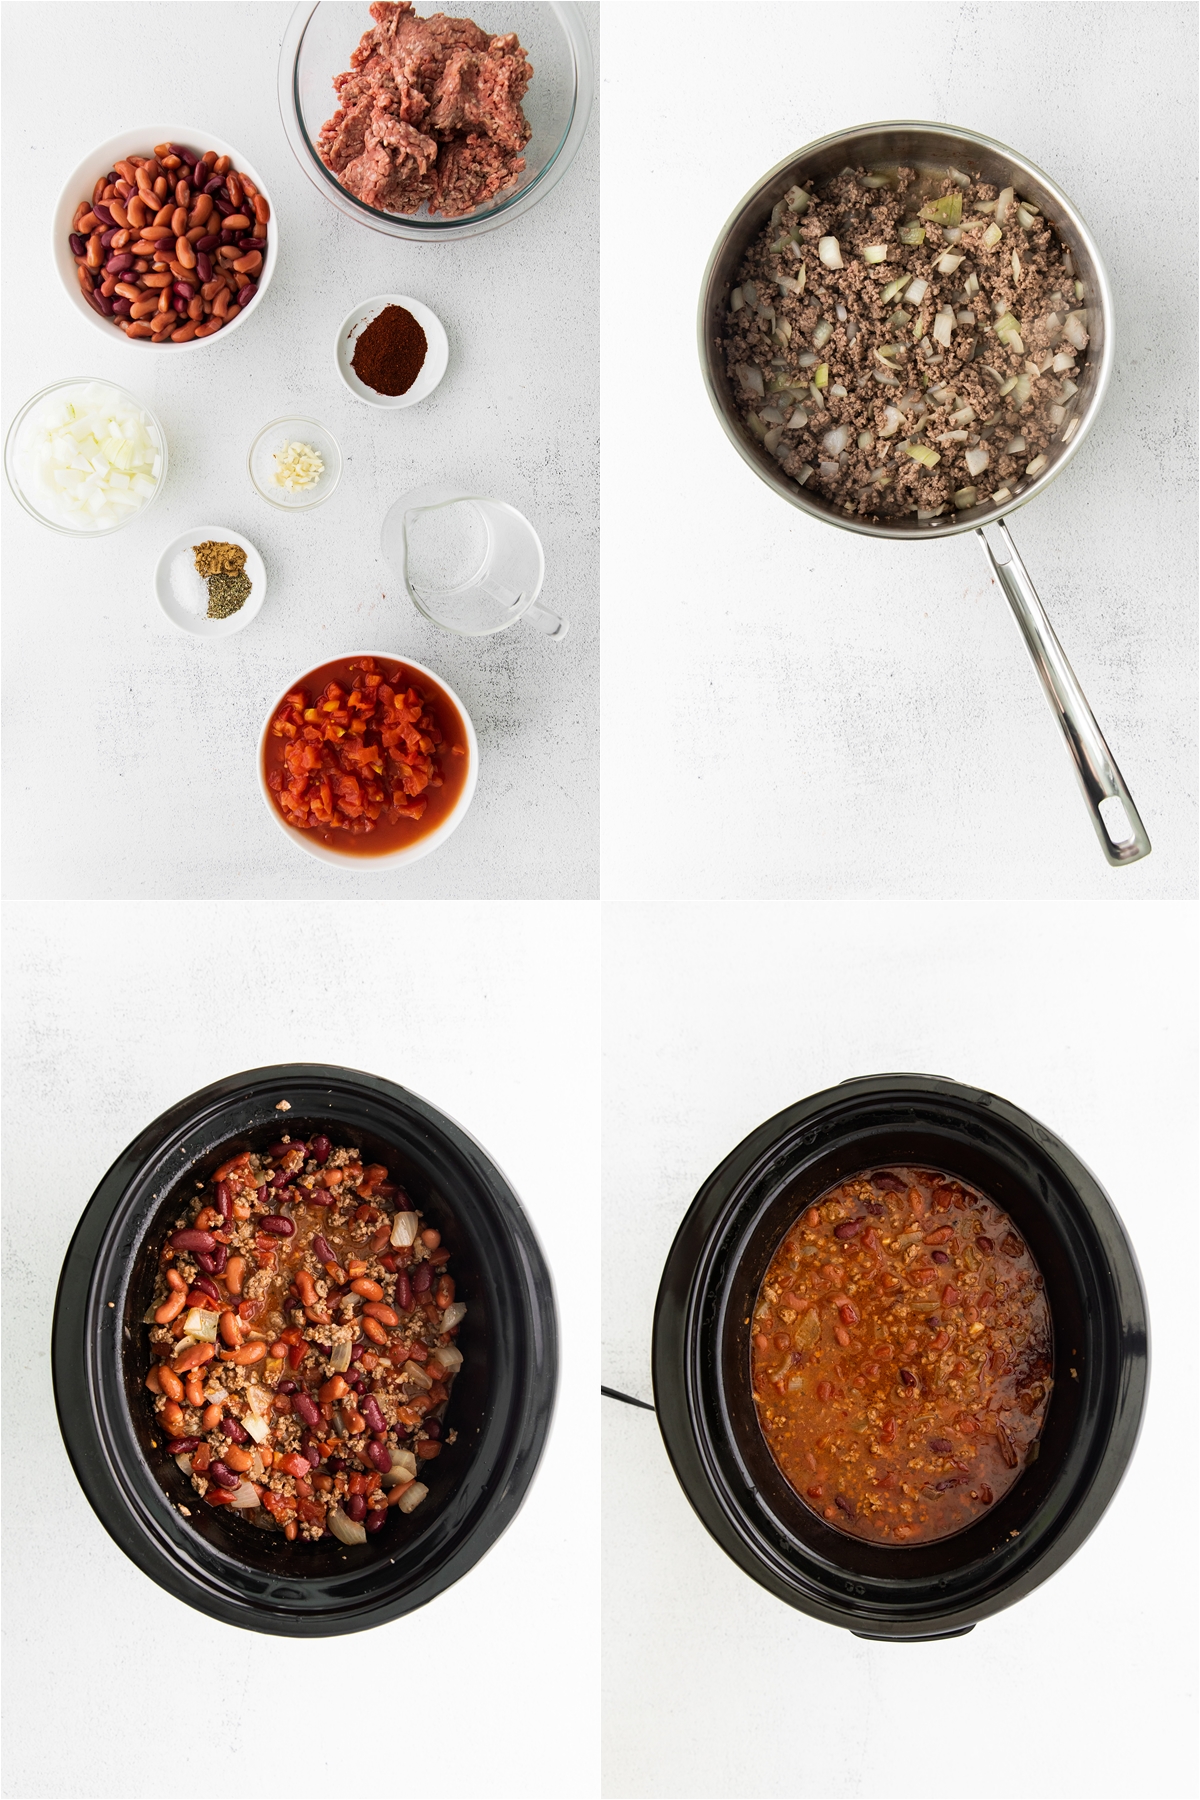 Process of Easy Slow Cooker Chili recipe with ground beef, chopped onions, and minced garlic on a skillet.